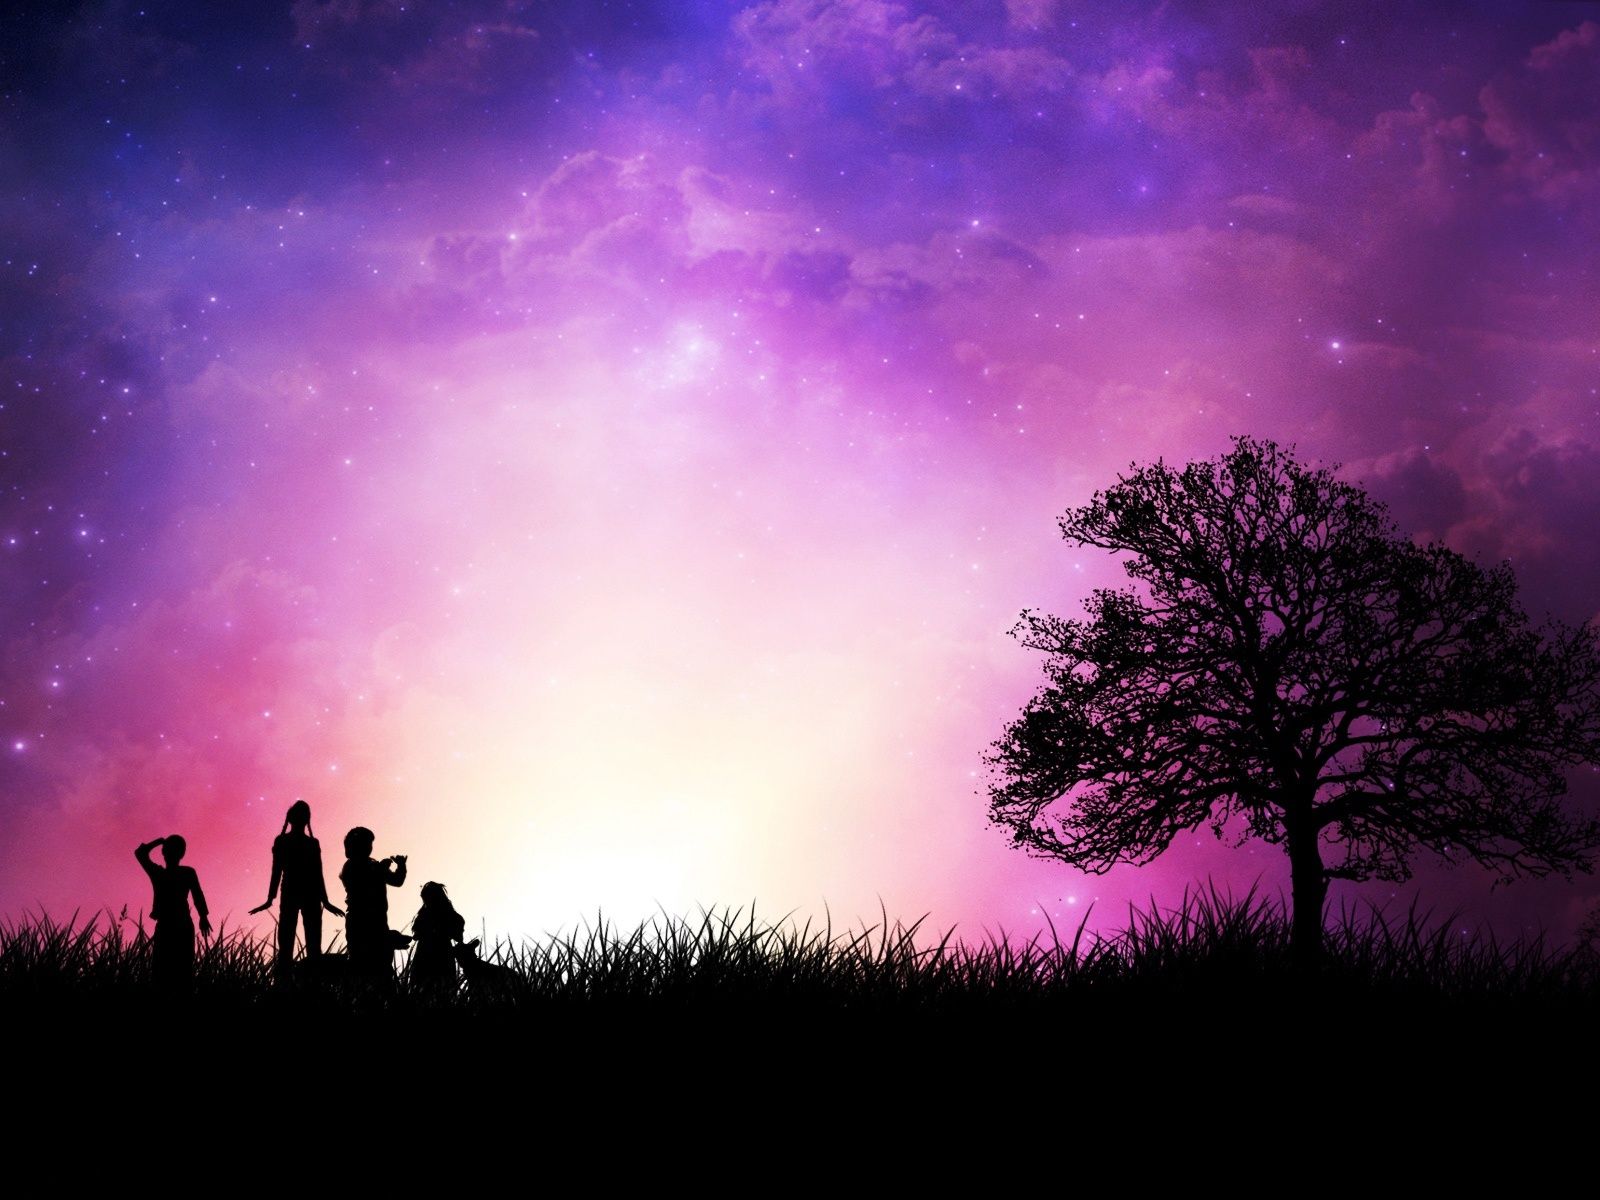 Kids and tree in silhouette with purple sky | Simply Silhouettes ...